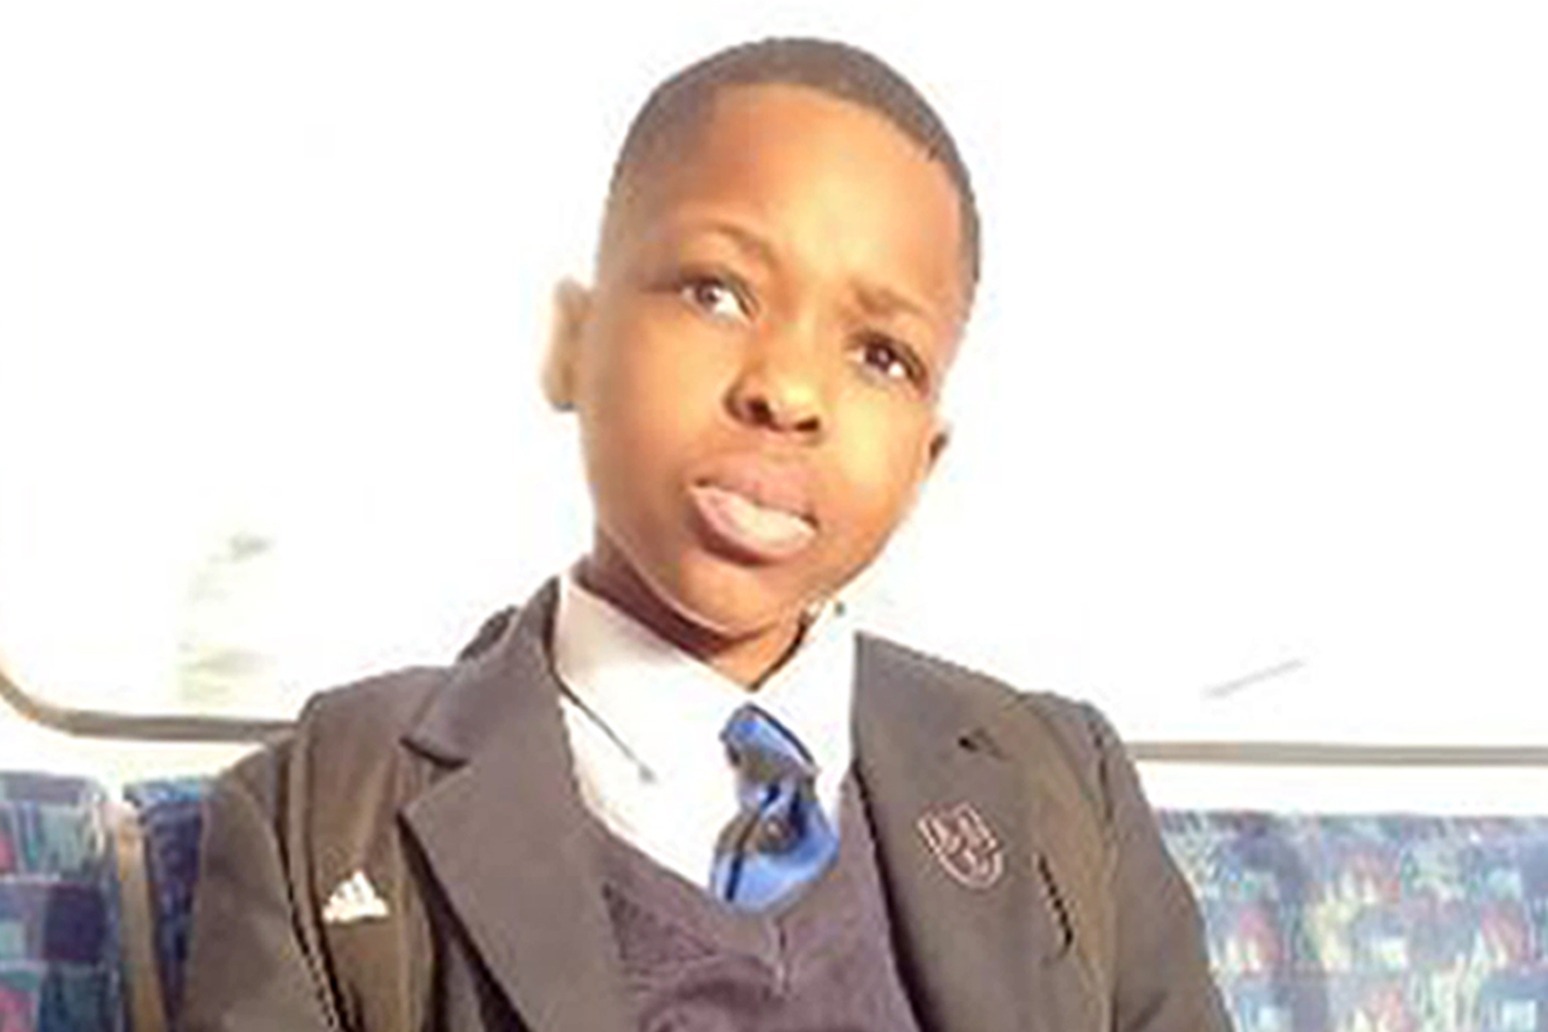 Tributes paid to 14-year-old boy killed in east London 